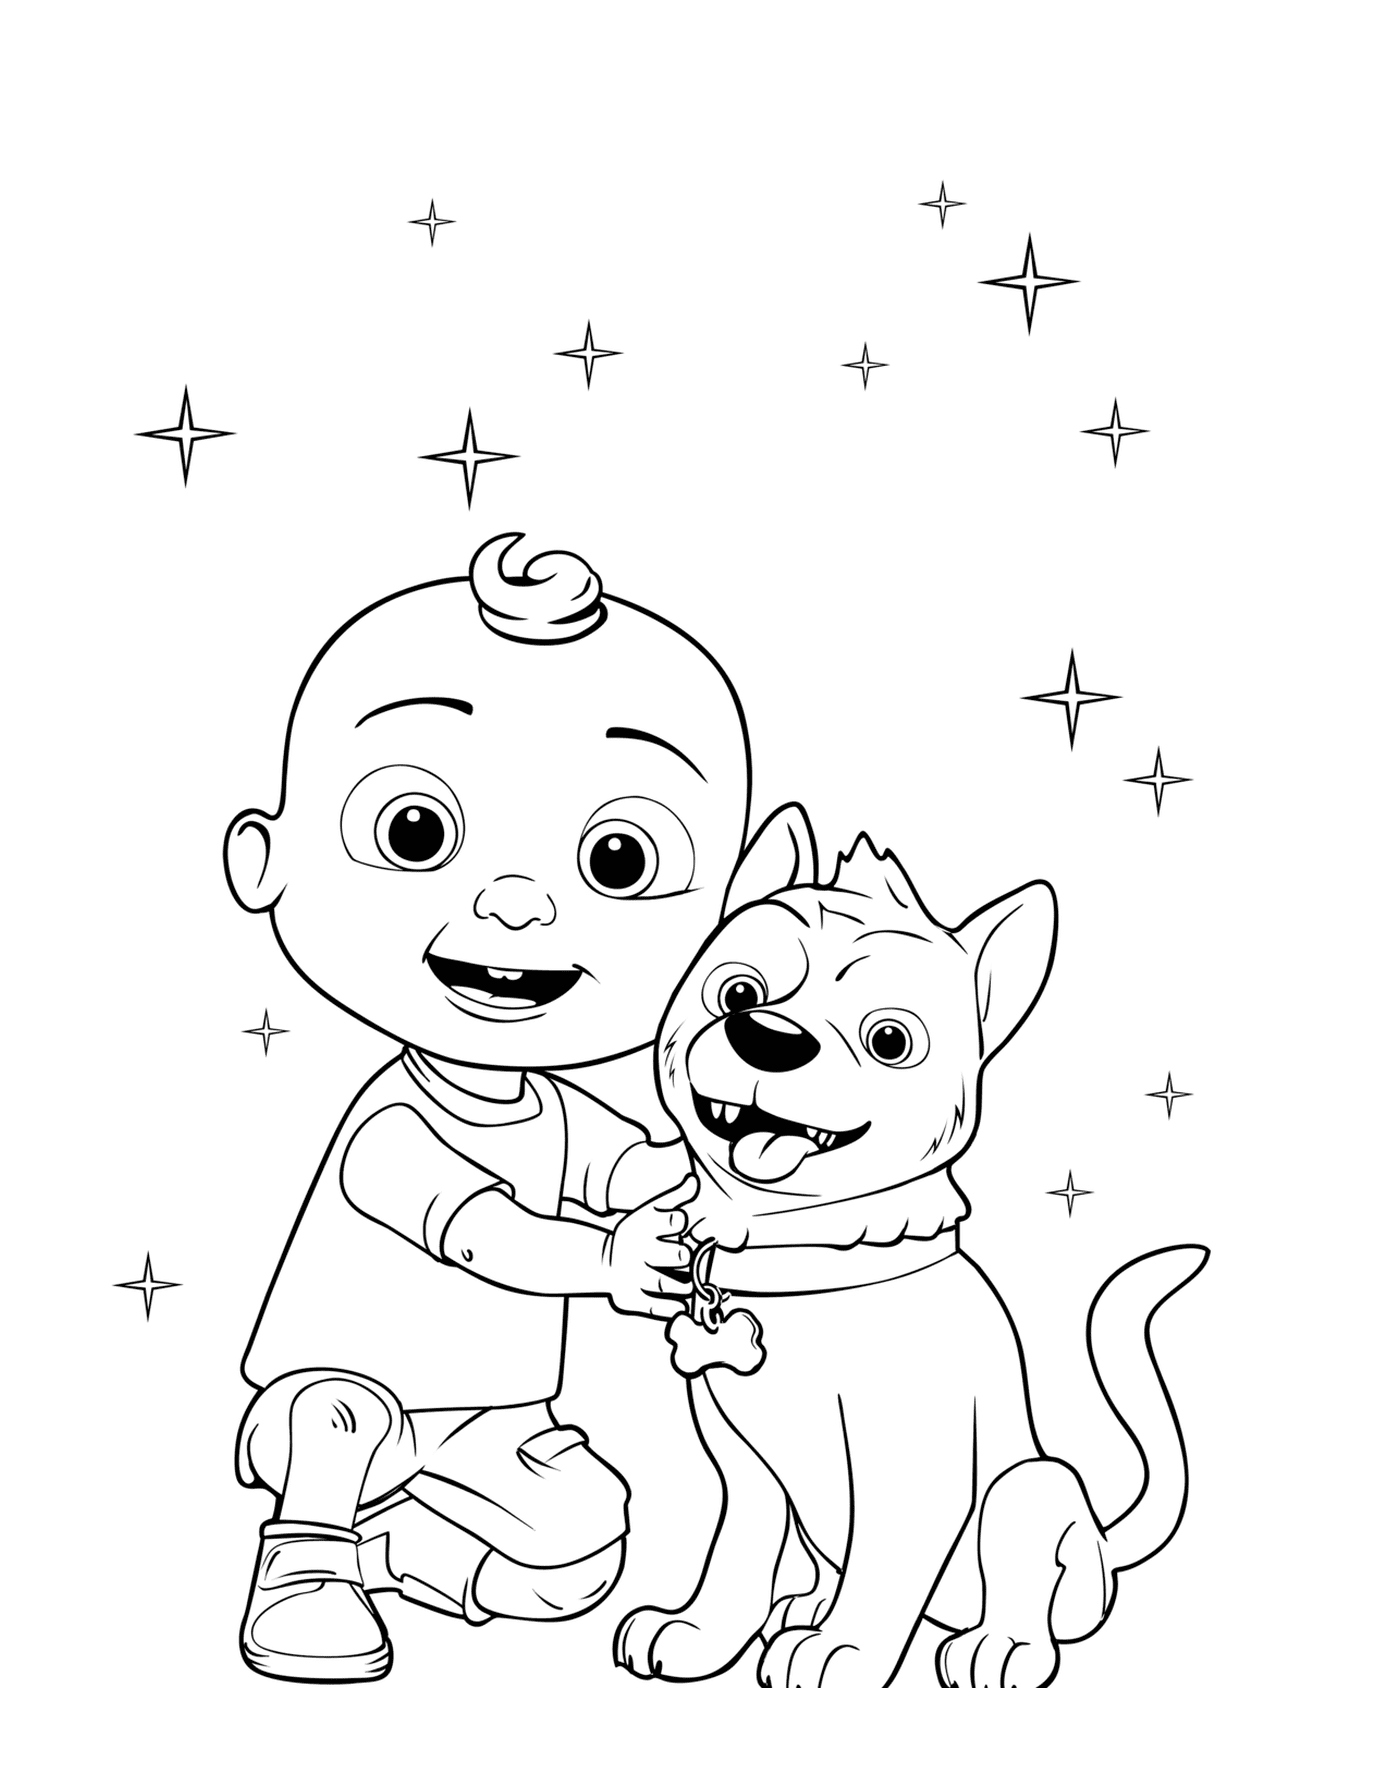  Baby Jay JJ from CoComelon and his dog Bingo 